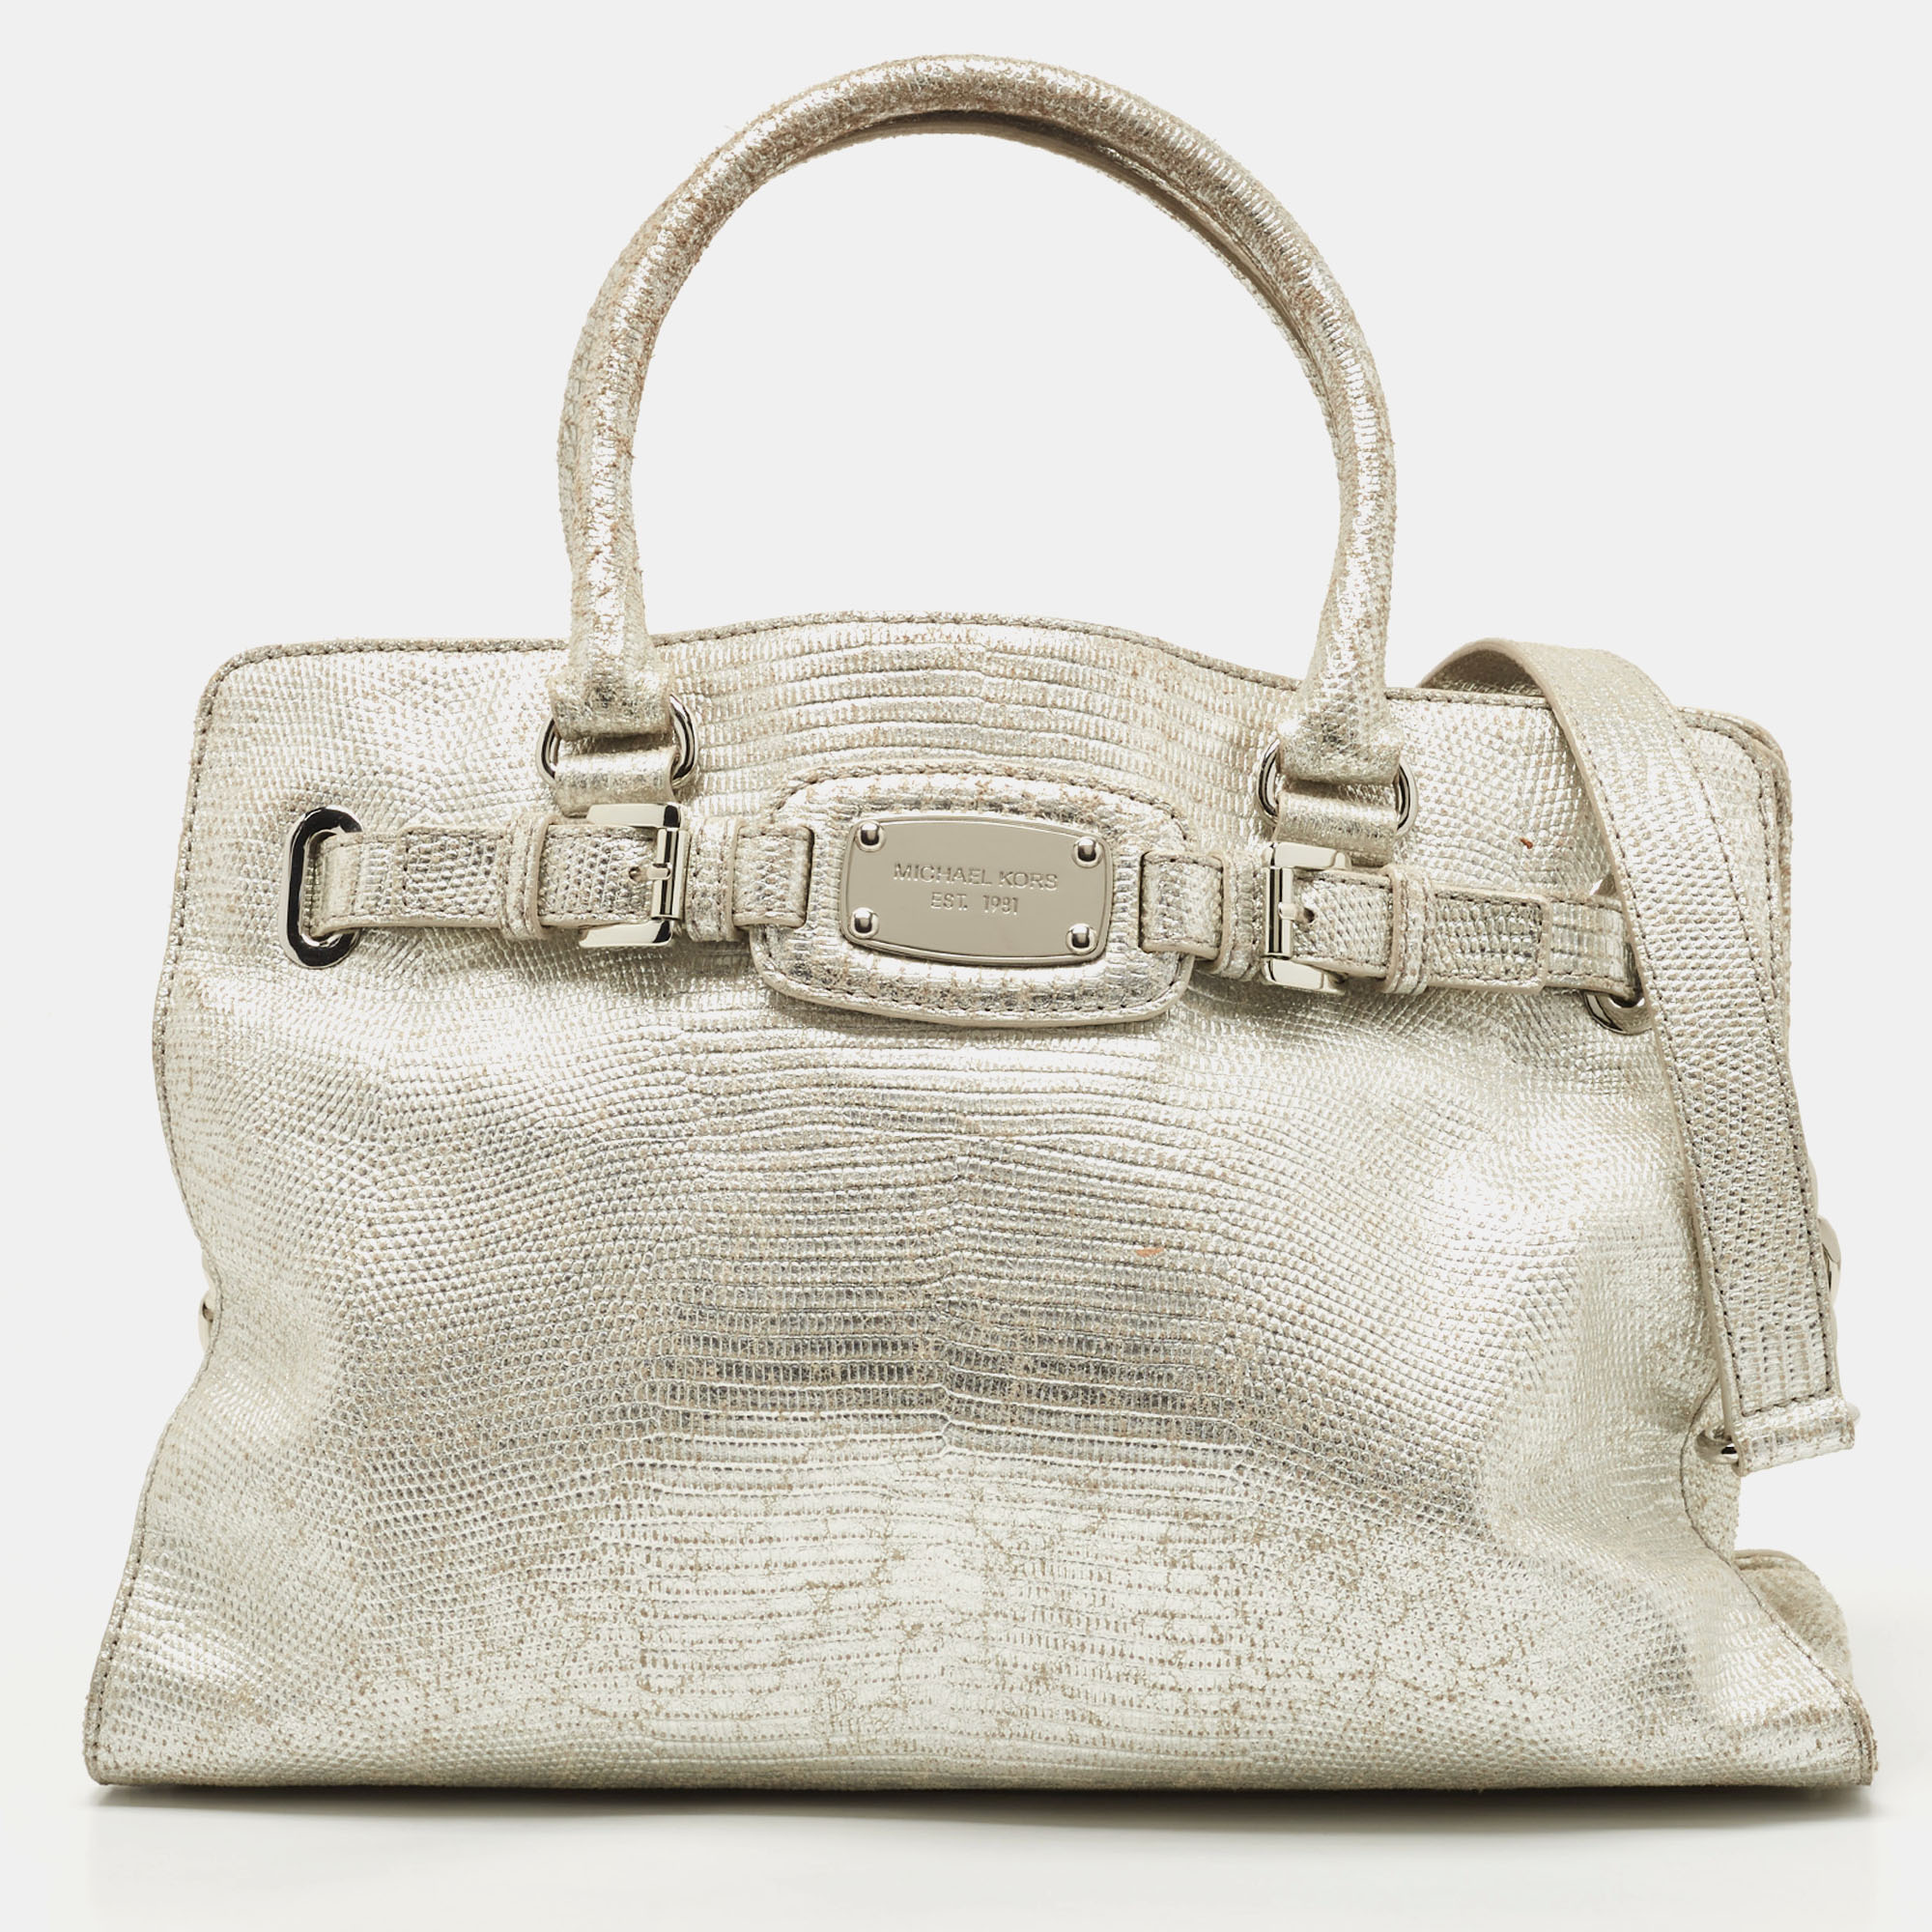 This simple Hamilton tote from Michael Kors is a worthy buy. It features dual top handles a shoulder strap protective metal feet and belt detailing on the front. Crafted from silver leather it has a spacious lined interior for all your essentials.